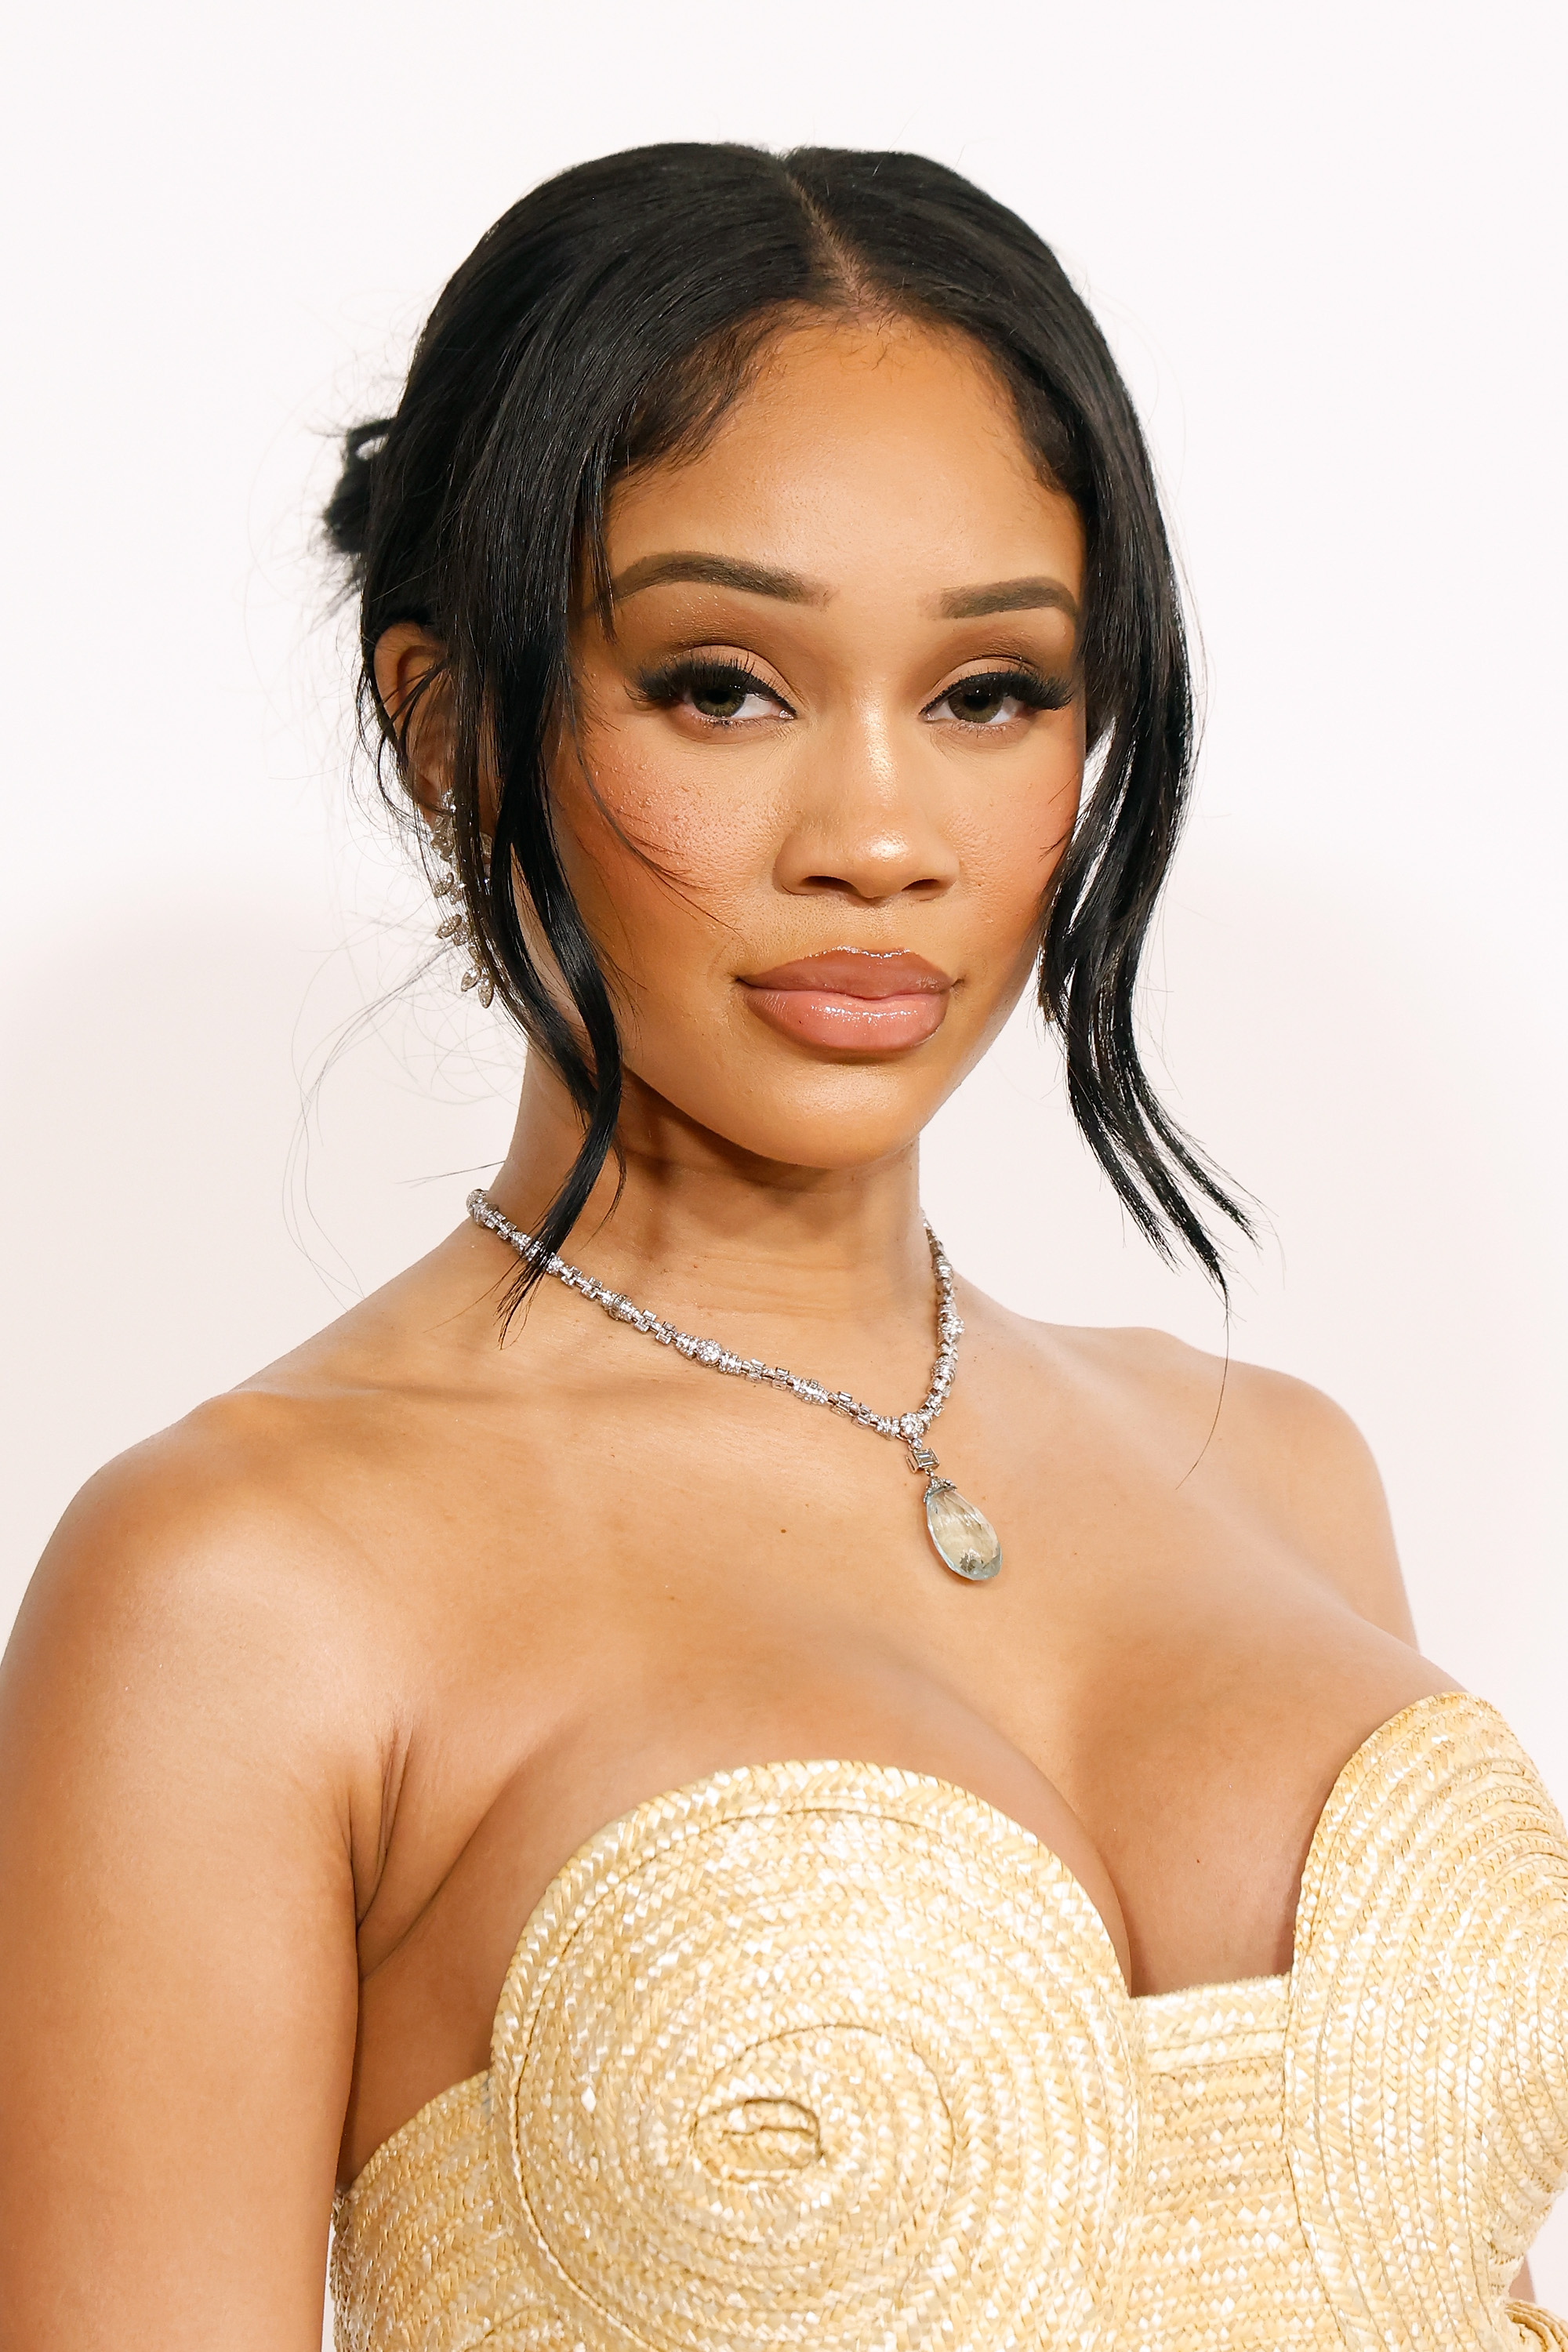 Saweetie at the 2023 CFDA Awards on November 6, 2023, in New York City. | Source: Getty Images